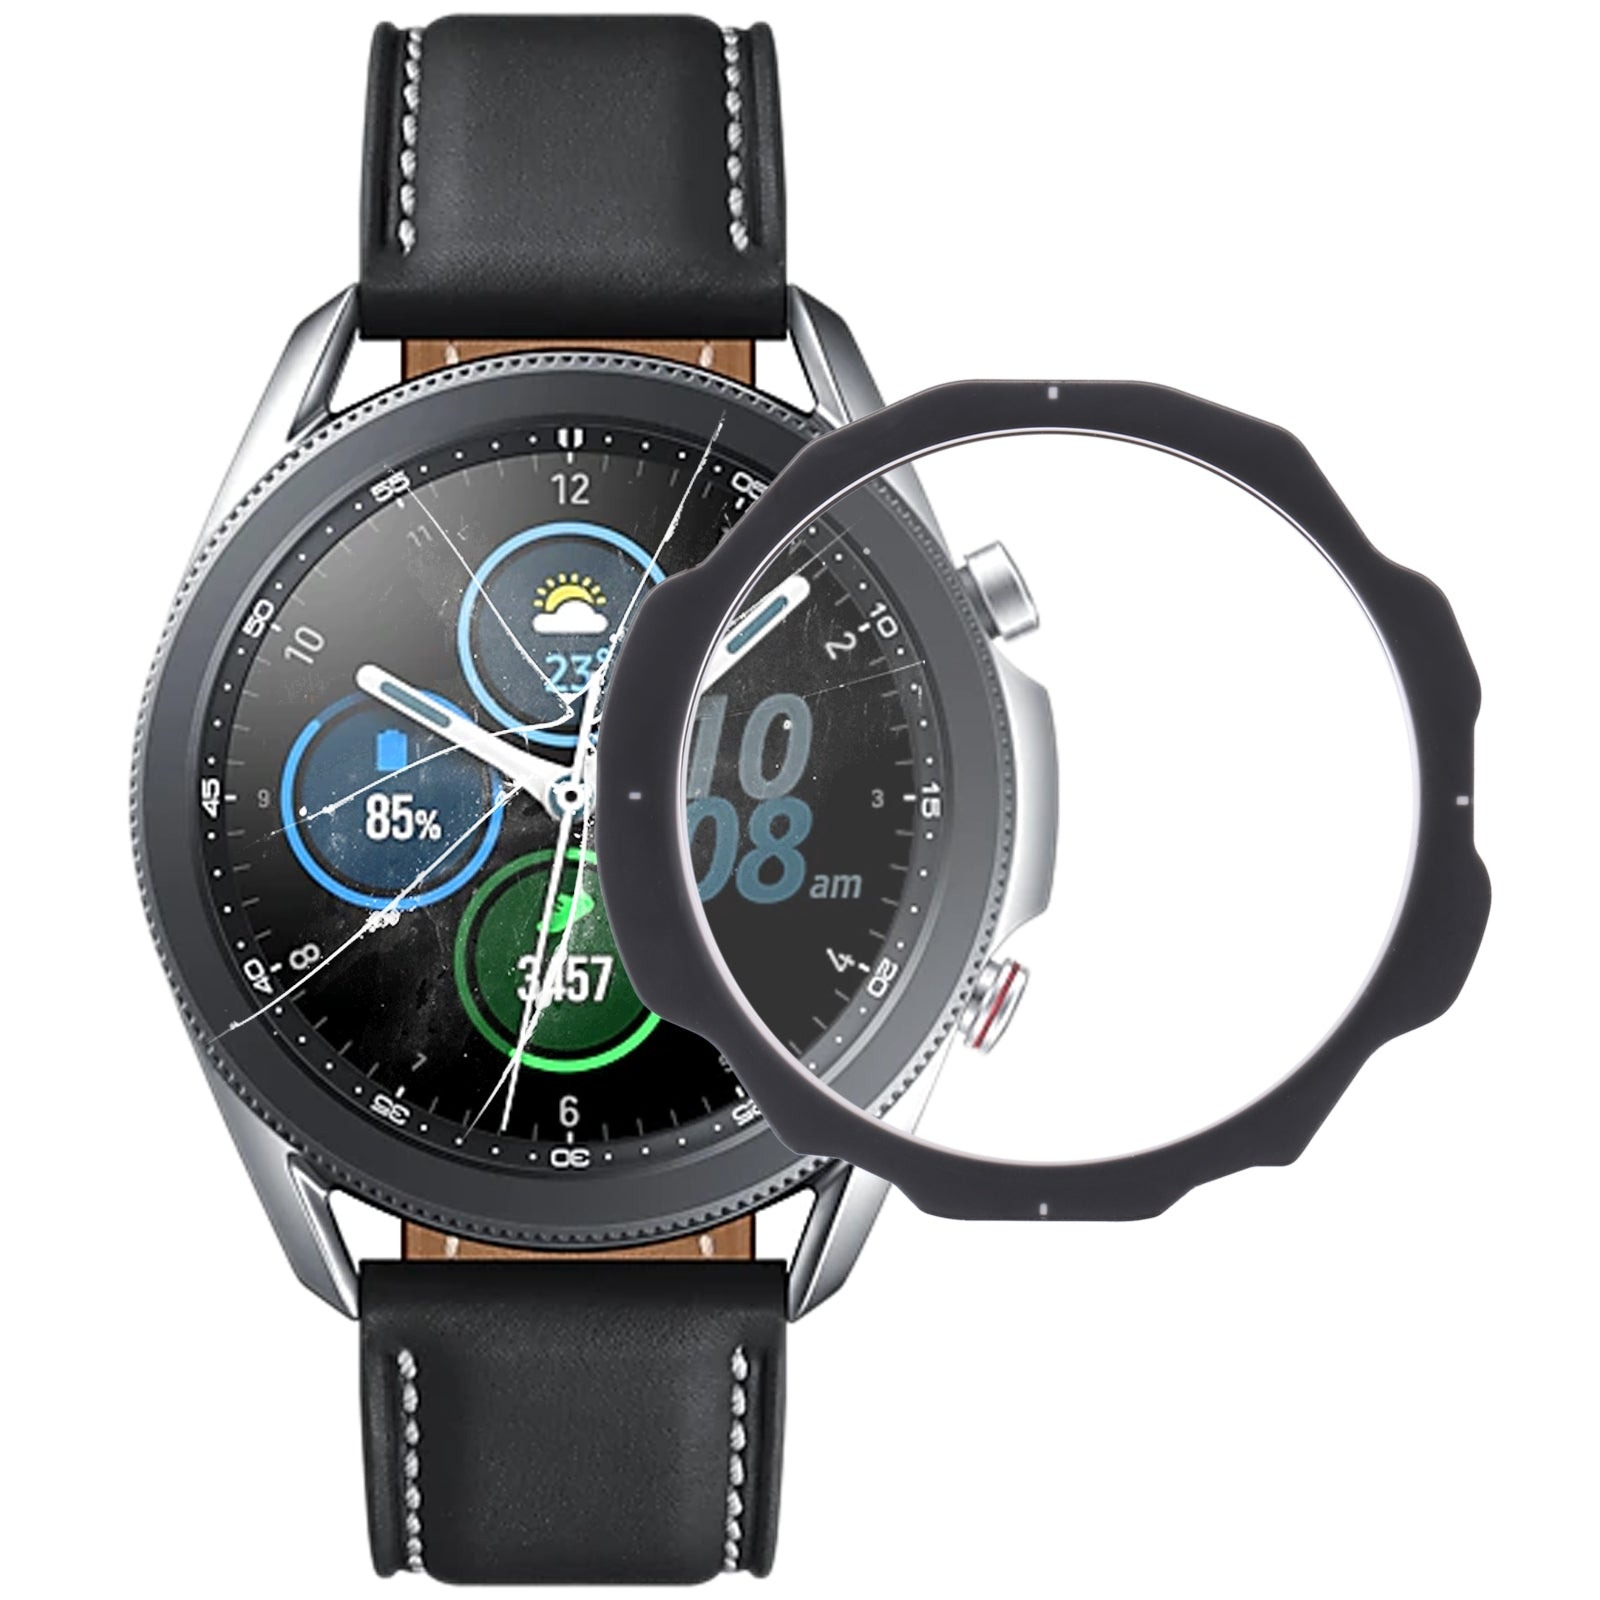 Outer Glass Front Screen Samsung Galaxy Watch 3 41mm R850 / R855 Black